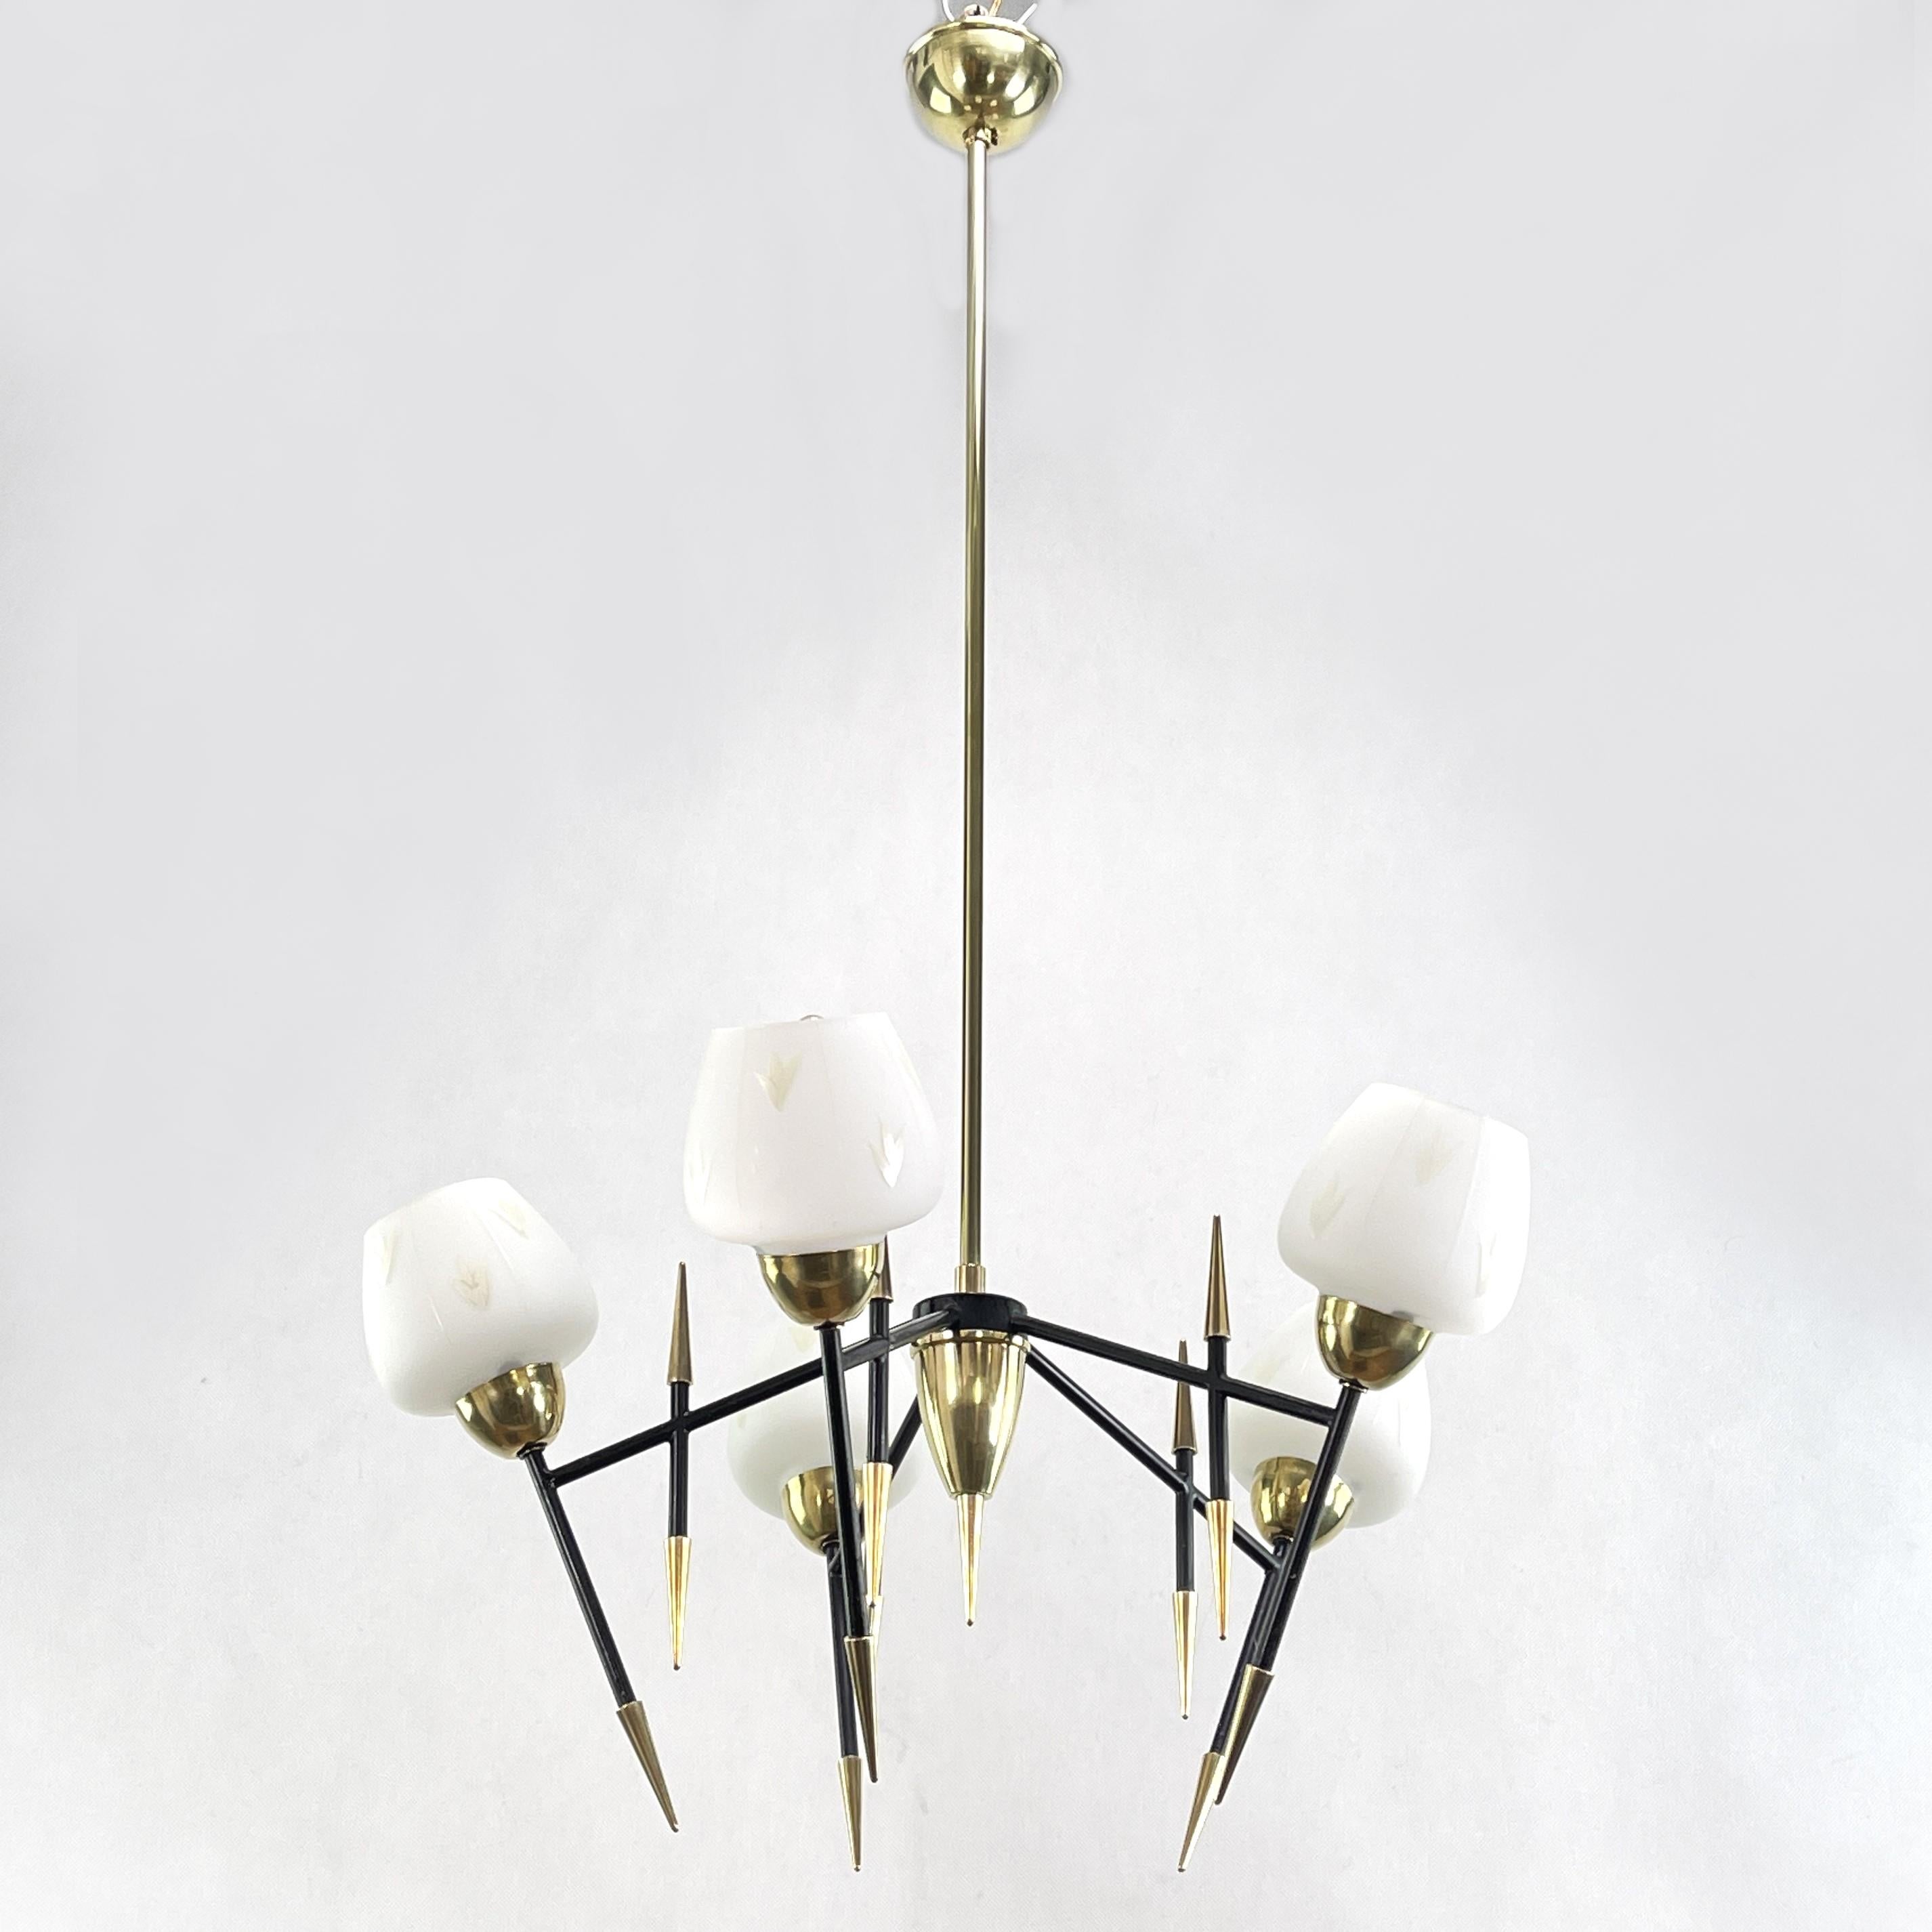 Midcentury ceiling lamp - 1950s

The black, gold and white lamp is a real classic from the 1950s. This chandelier has an extraordinary design and is a highlight for every lounge interior of the Panton-Eames era. It is in the style of the Maison